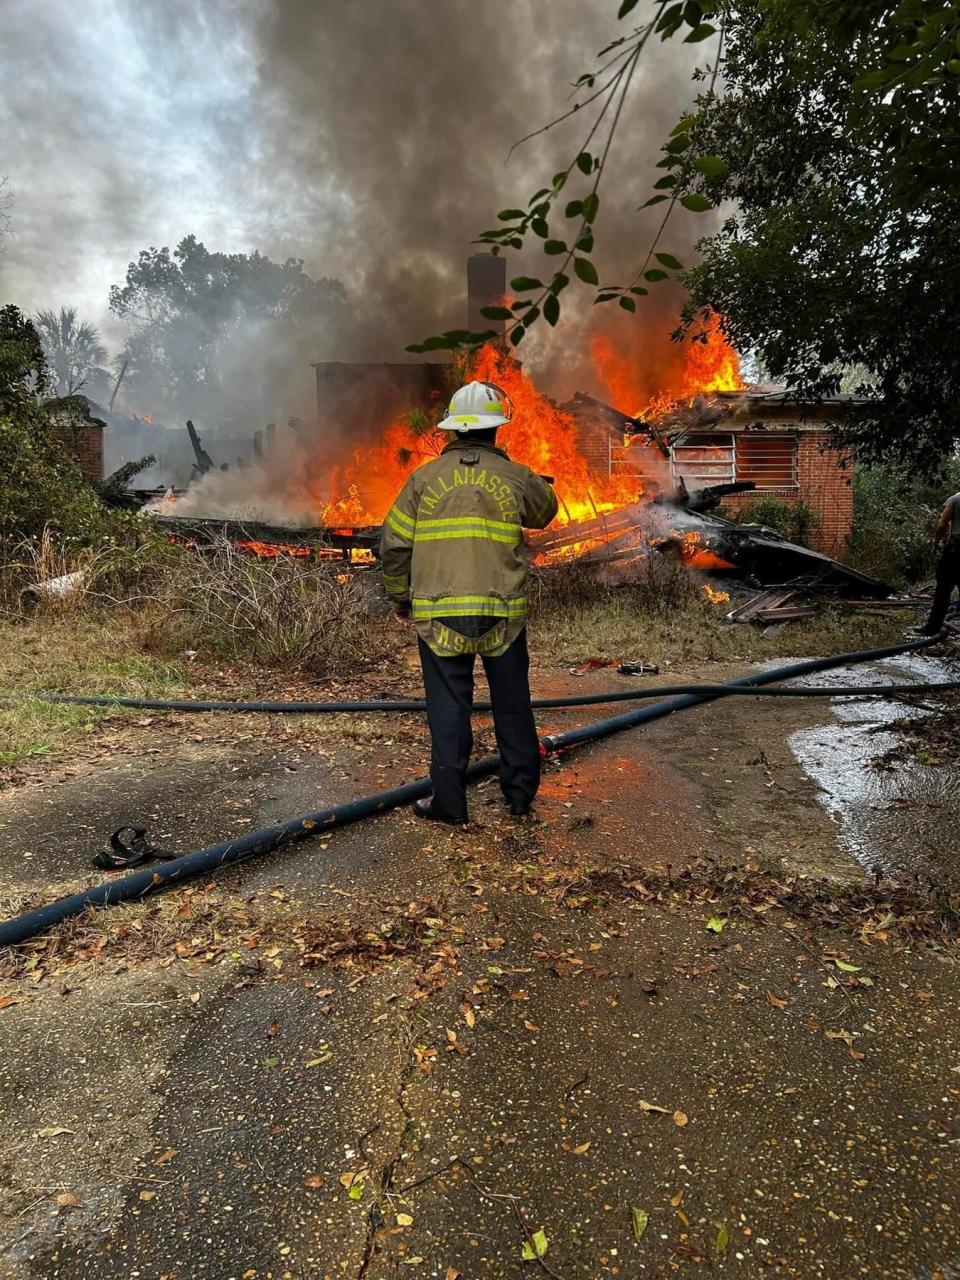 Tallahassee Firefighters extinguish large house fire on Mahan Drive Monday evening.